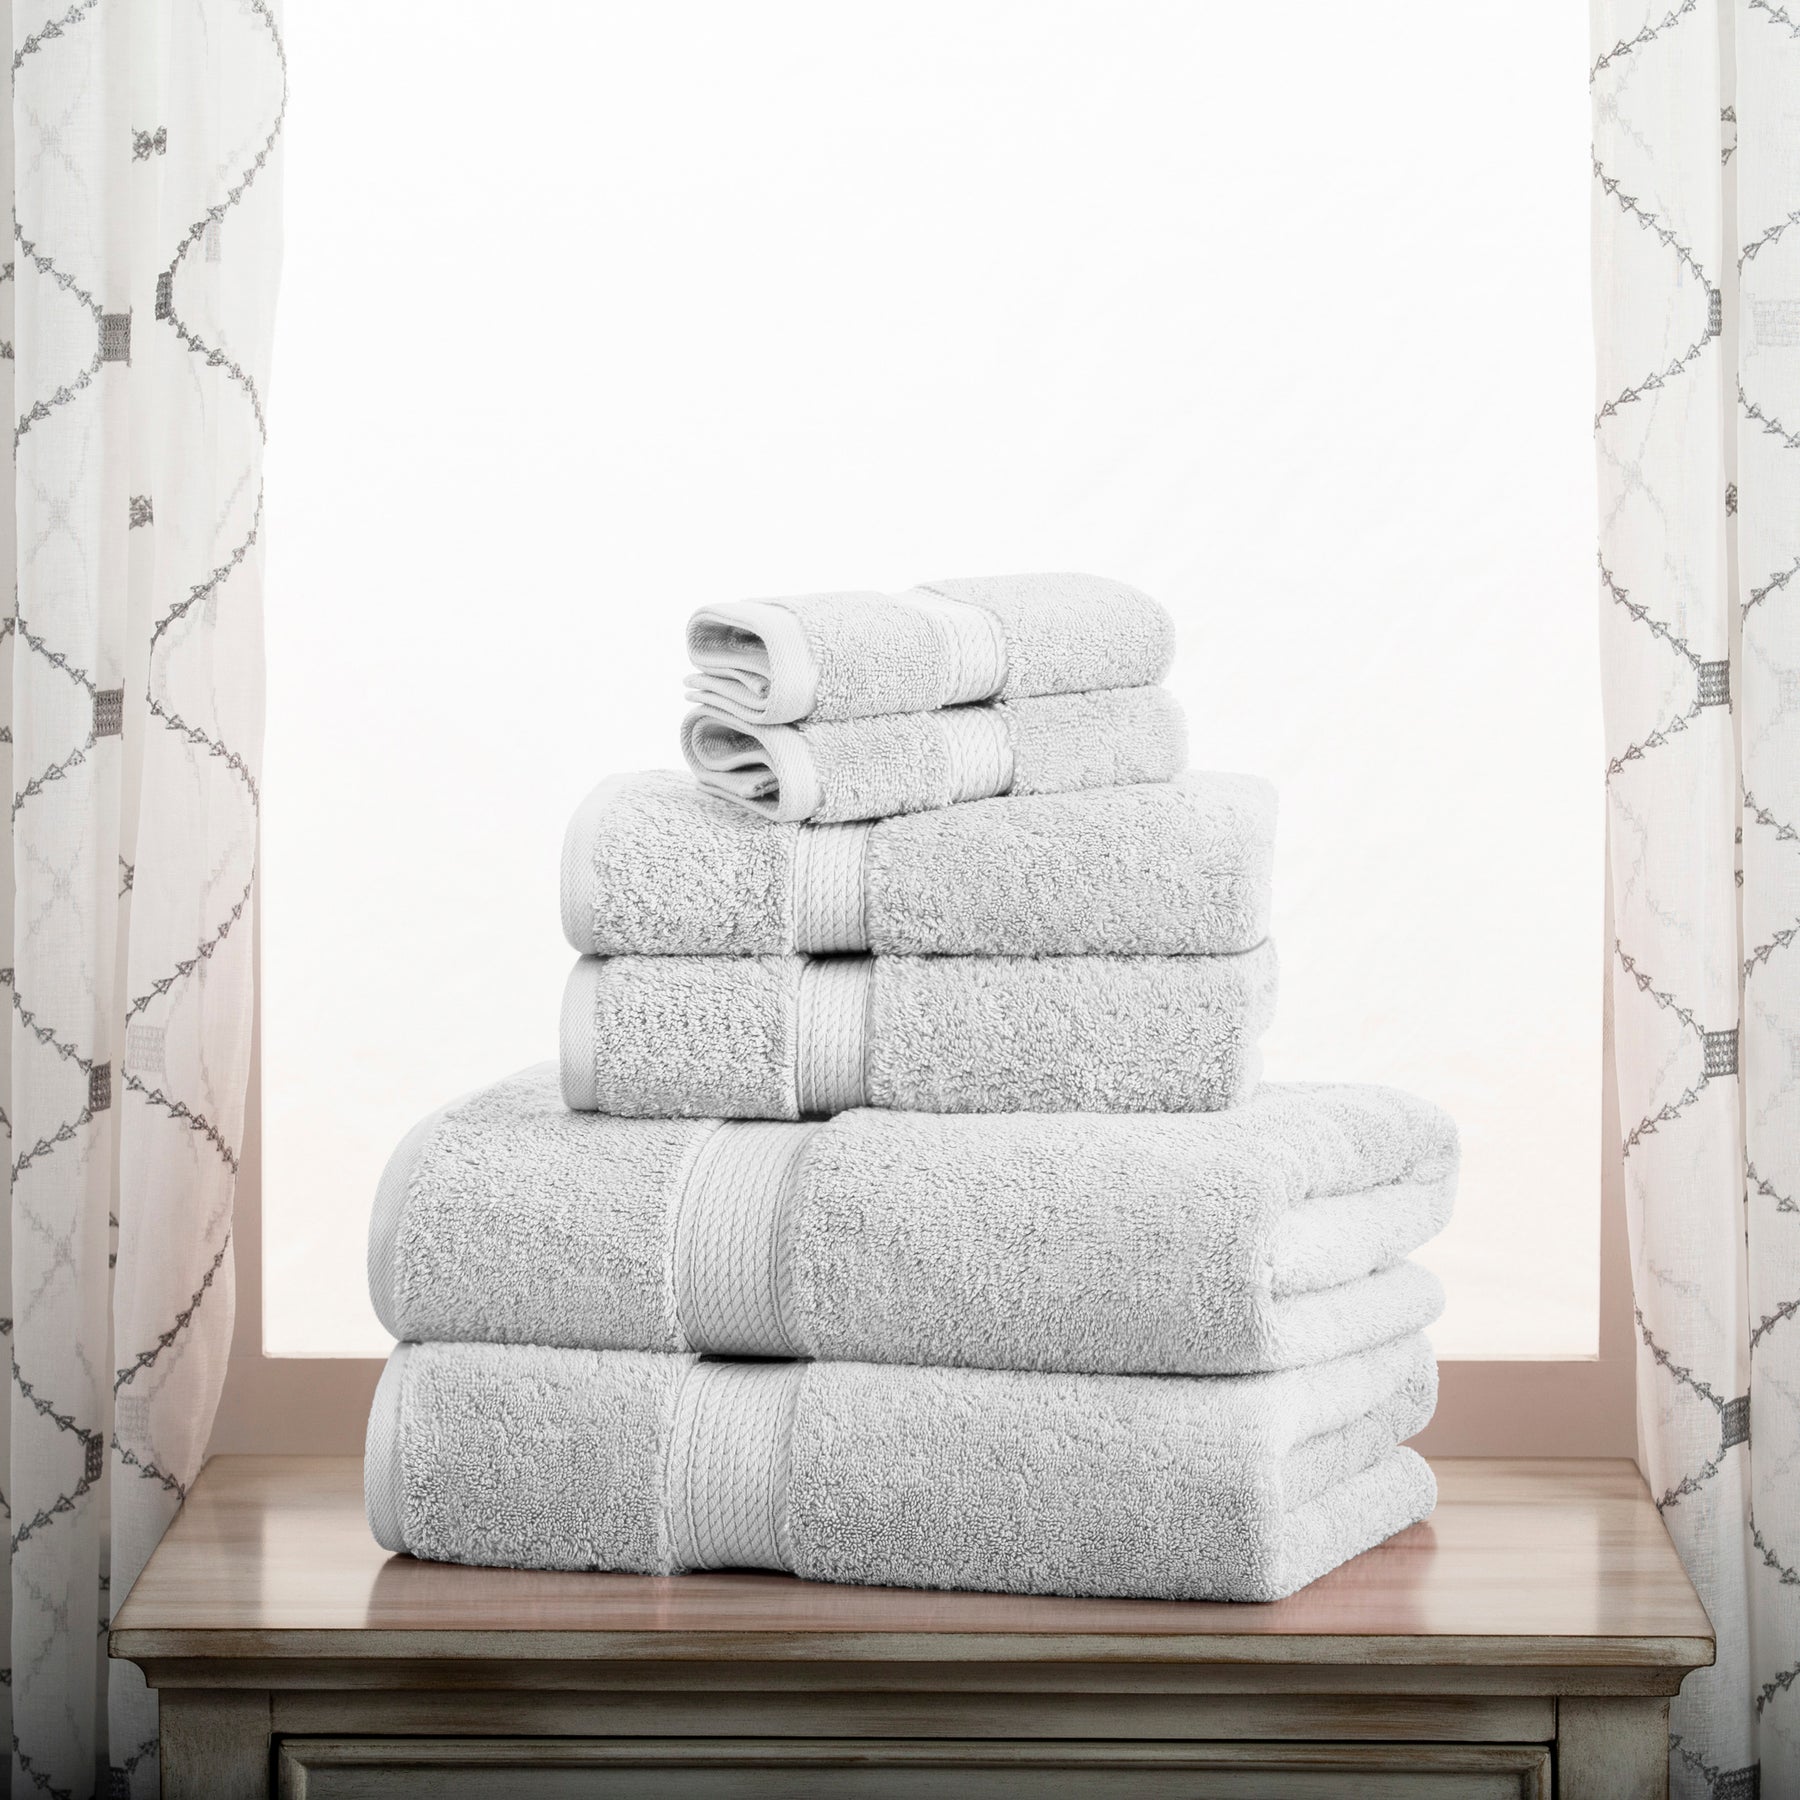 SUPERIOR 100% Cotton Towel Set, 6-Piece Set Includes 2 Bath Towels, 2 Hand  Towels, and 2 Washcloths, for Bathroom or Shower, Great for Face, Body